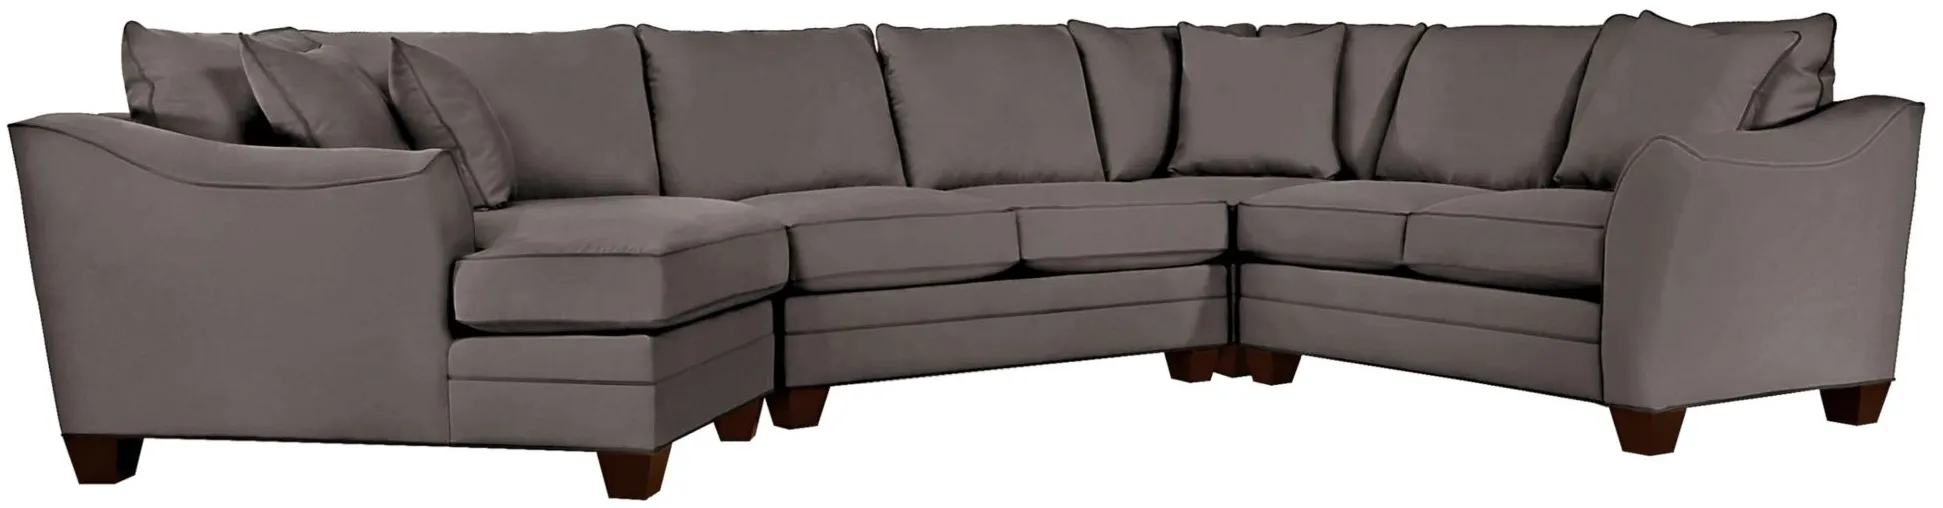 Foresthill 4-pc. Left Hand Cuddler with Loveseat Sectional Sofa in Suede So Soft Slate by H.M. Richards